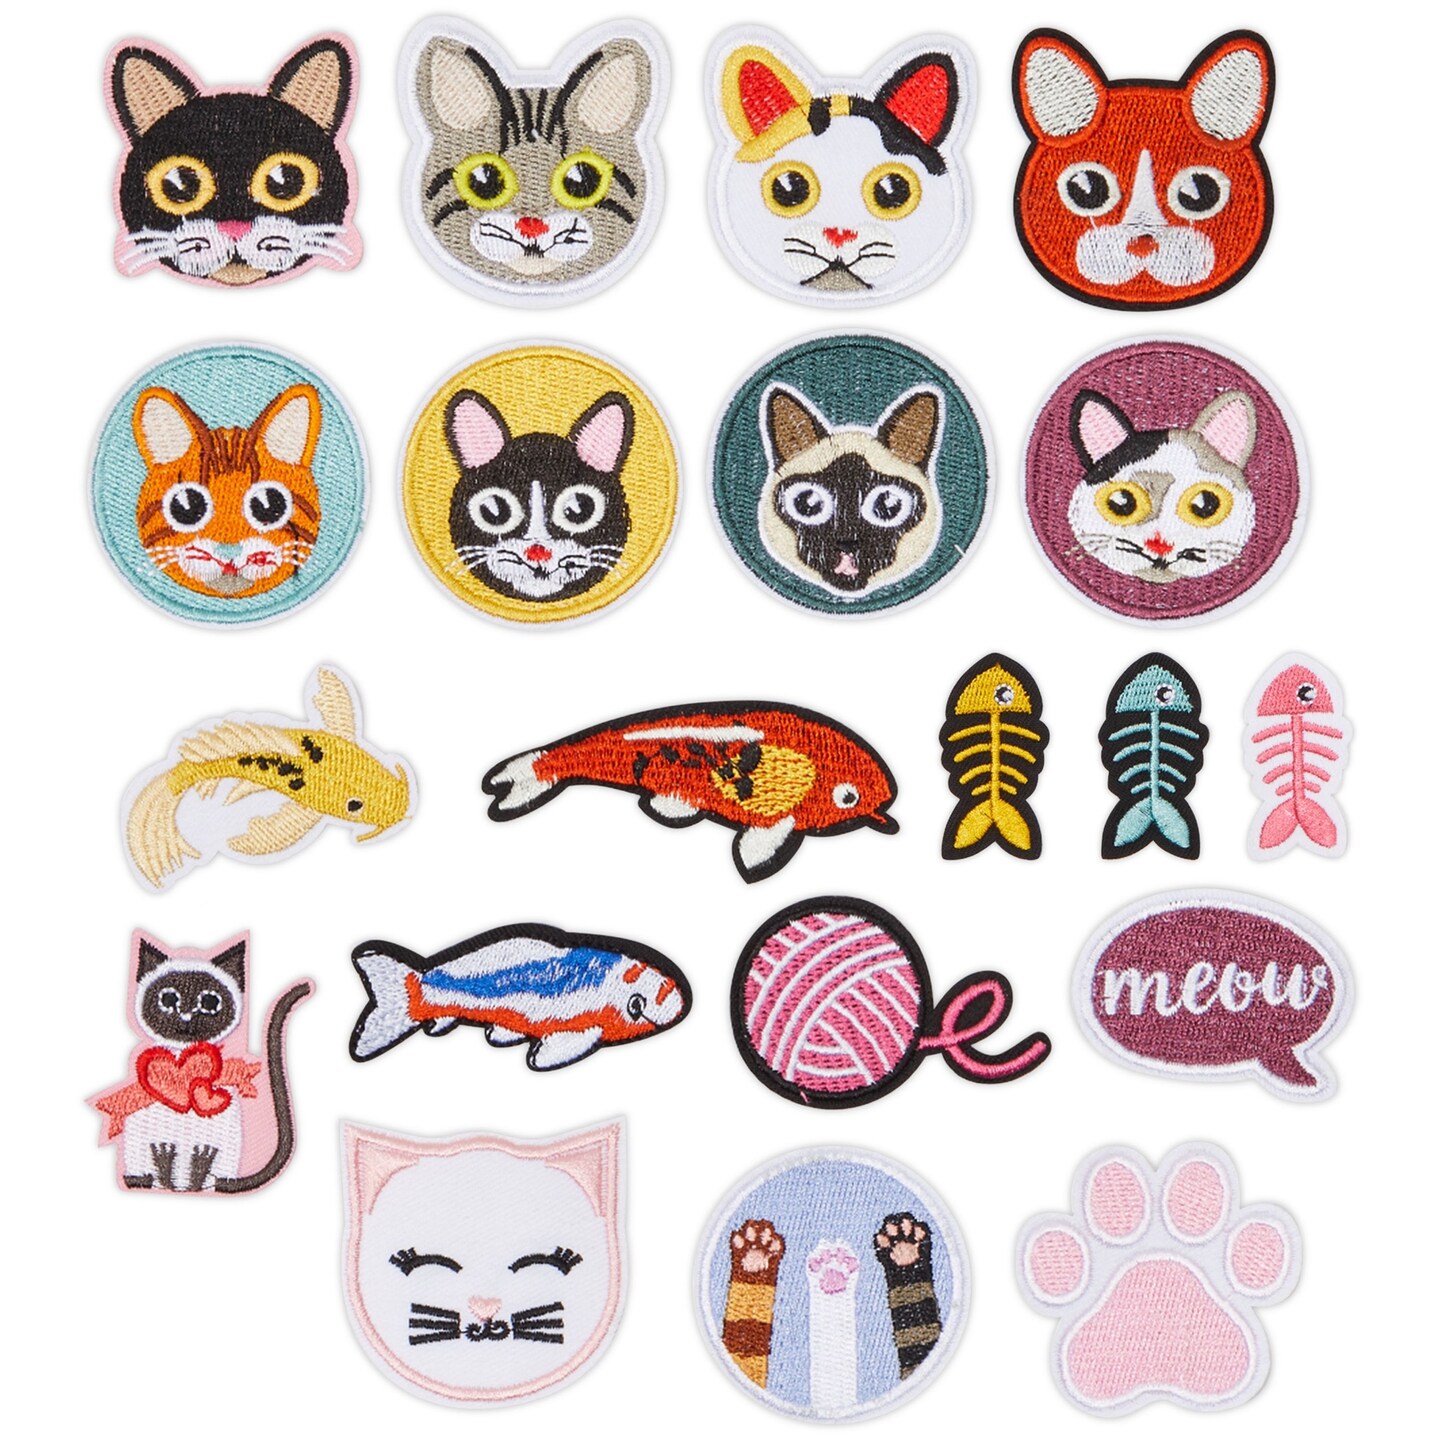 Cat and Fish Iron On Patches (20 Piece Set) Cute Embroidered Applique ...